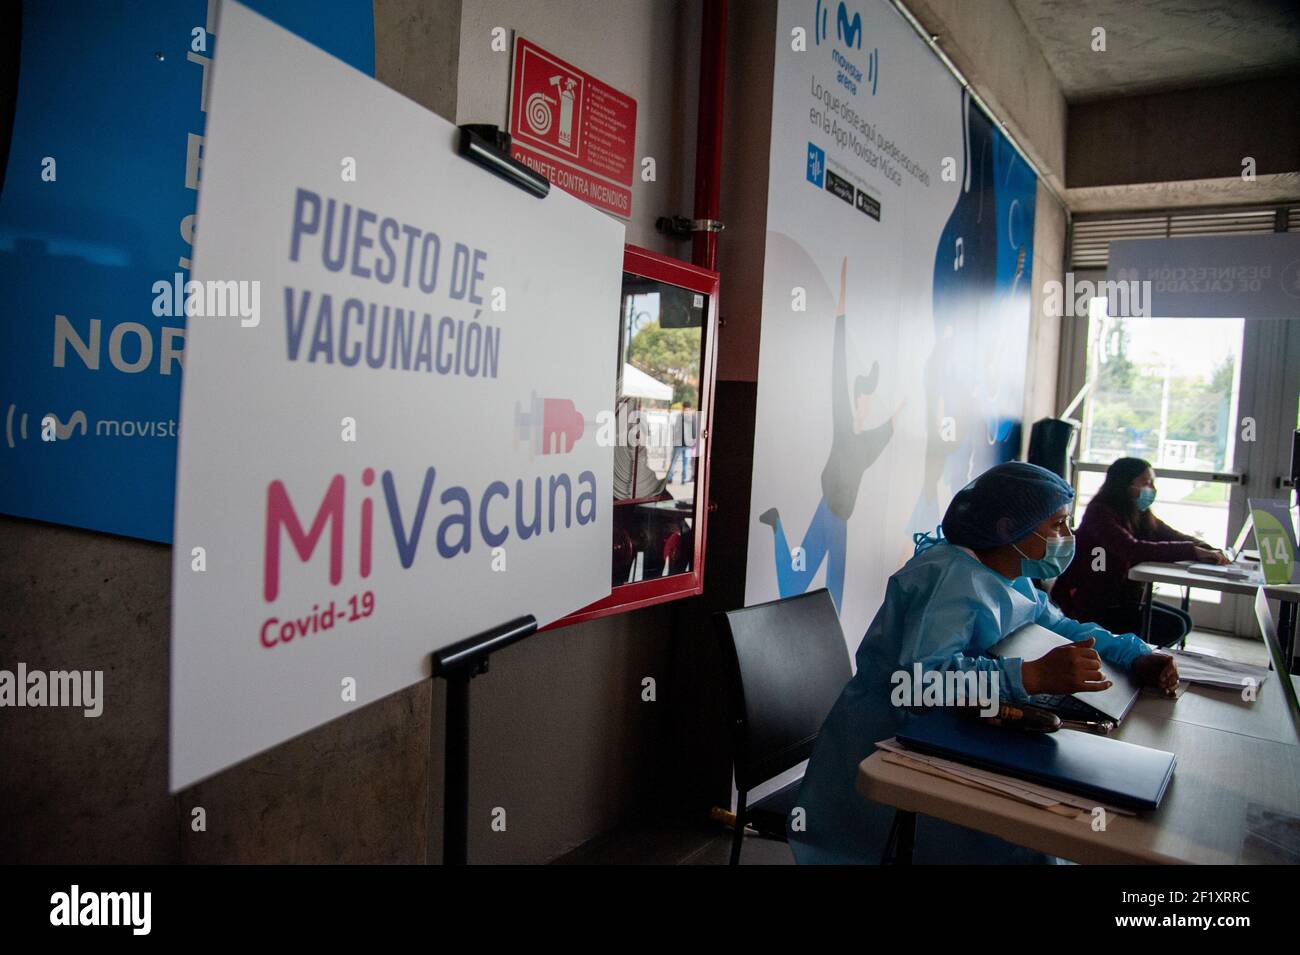 A sign of 'Mi Vacuna' campaing for COVID-19 vaccination in Colombia reads 'Vaccination point' In Bogota, Colombia on March 9, 2021 after Colombia star Stock Photo